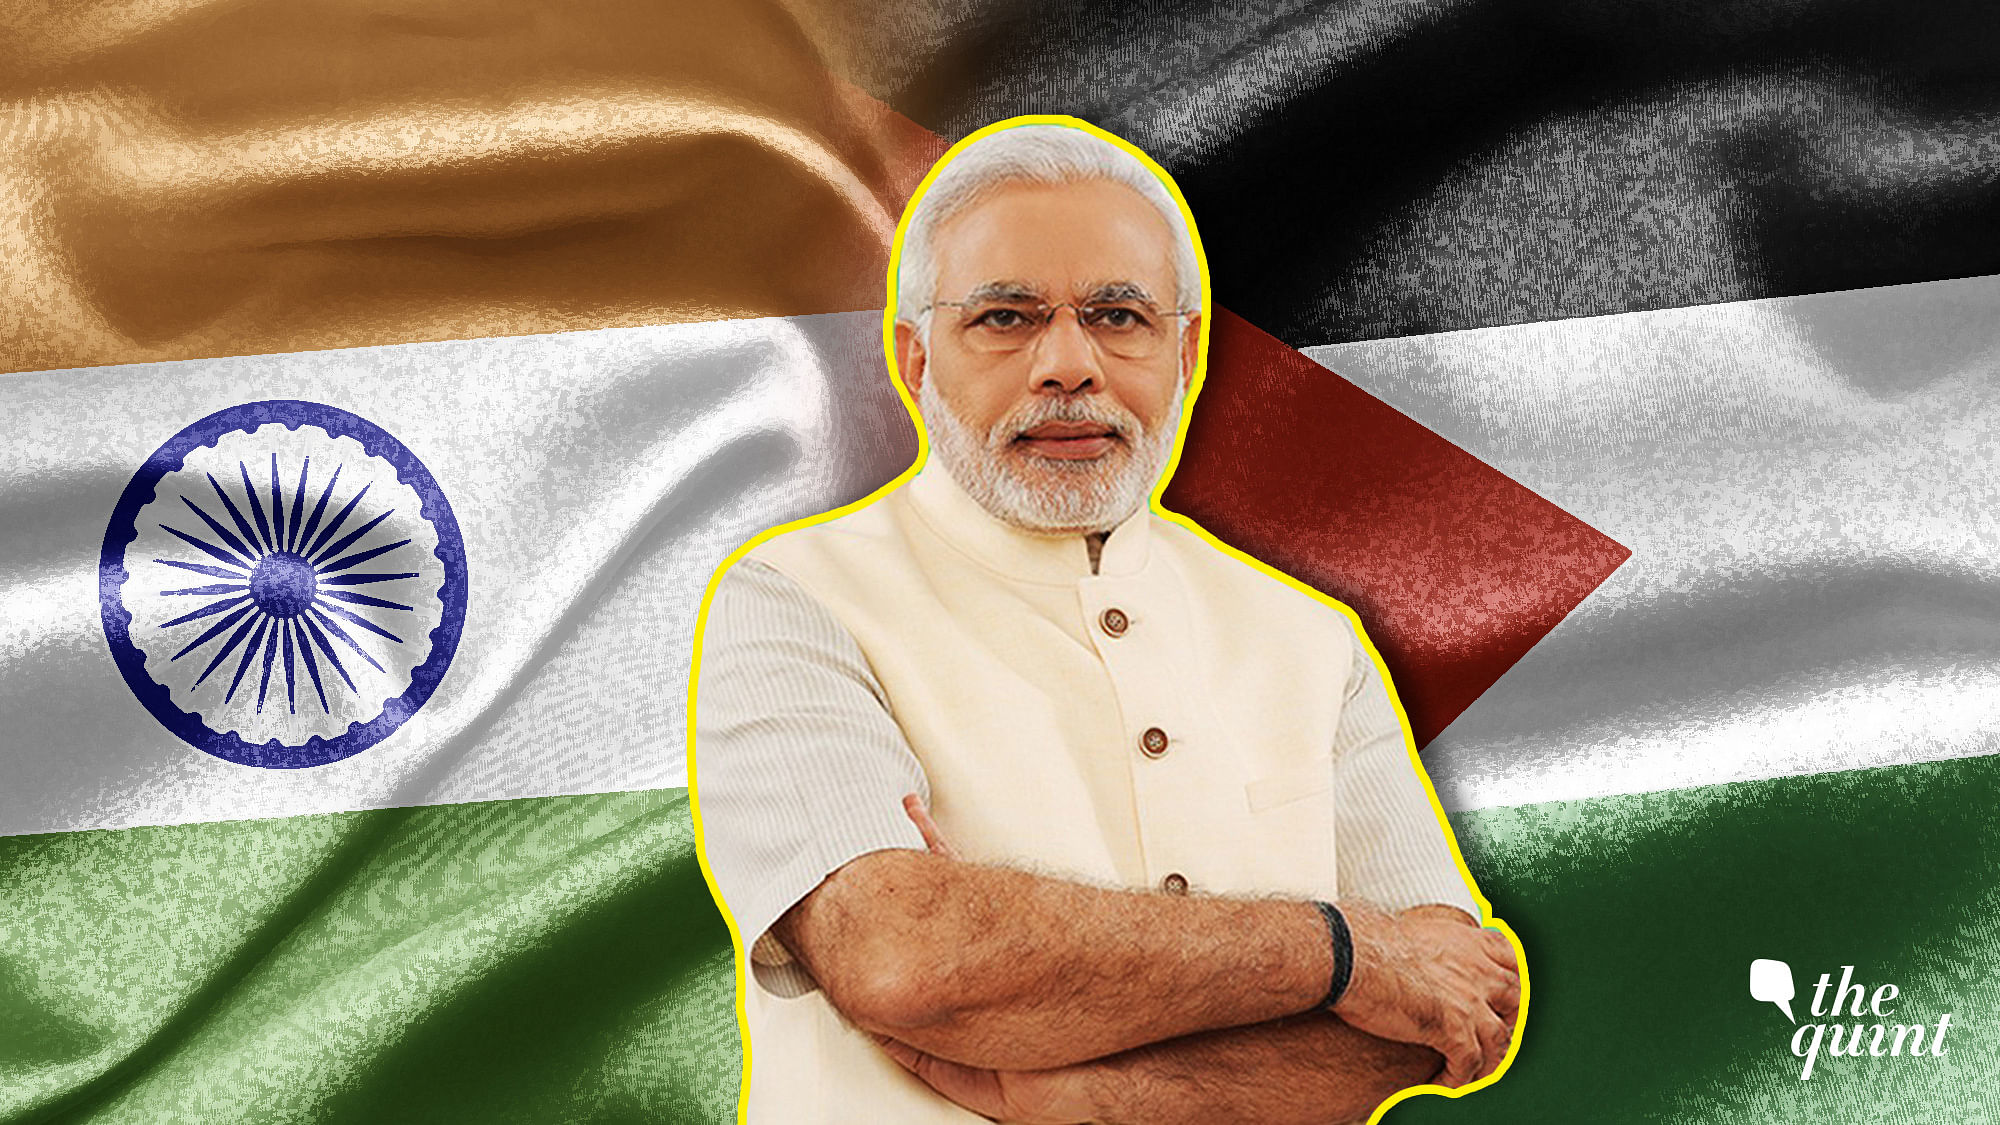 PM Narendra Modi’s Palestine visit is likely to do more harm than good, even by the low delivery standards of this government, writes Abhijit Iyer-Mitra.